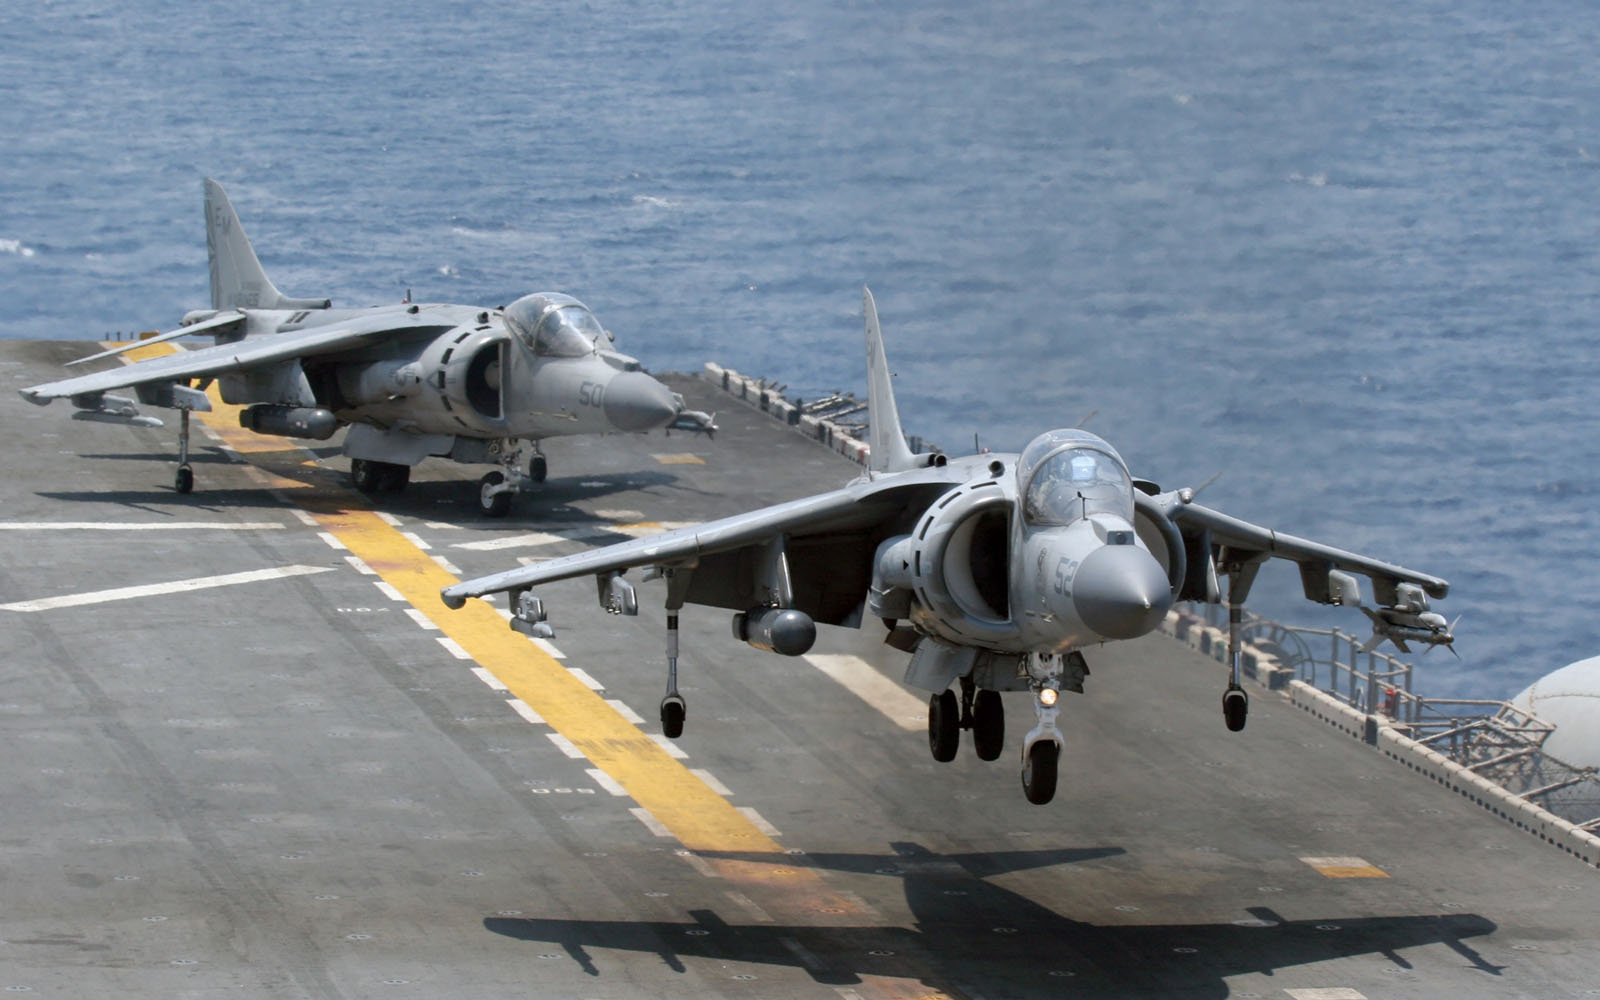 Tag Av 8b Harrier Ii Aircraft Wallpaper Image Photos And Pictures